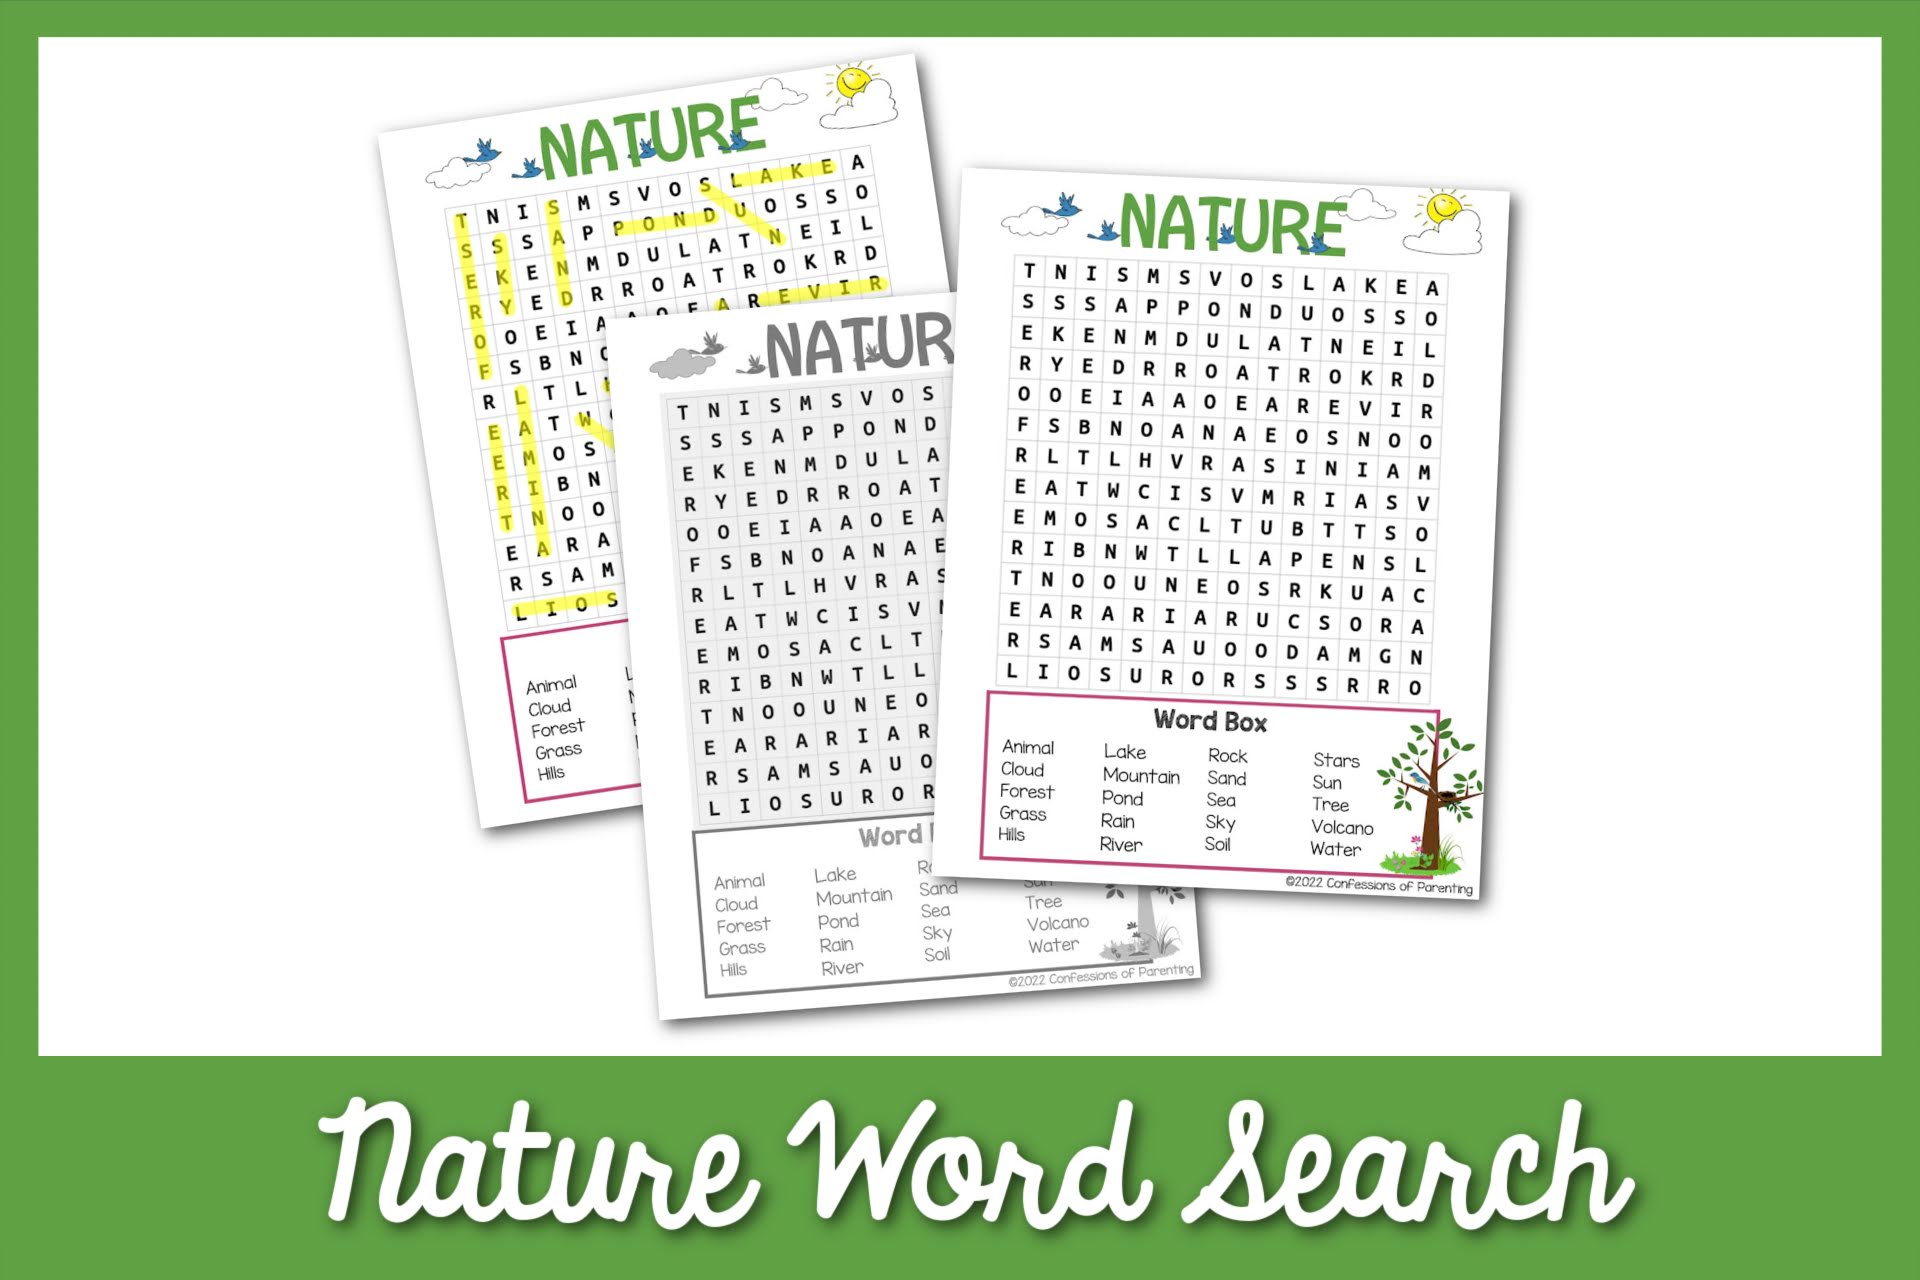 feature image: nature word search on a green border